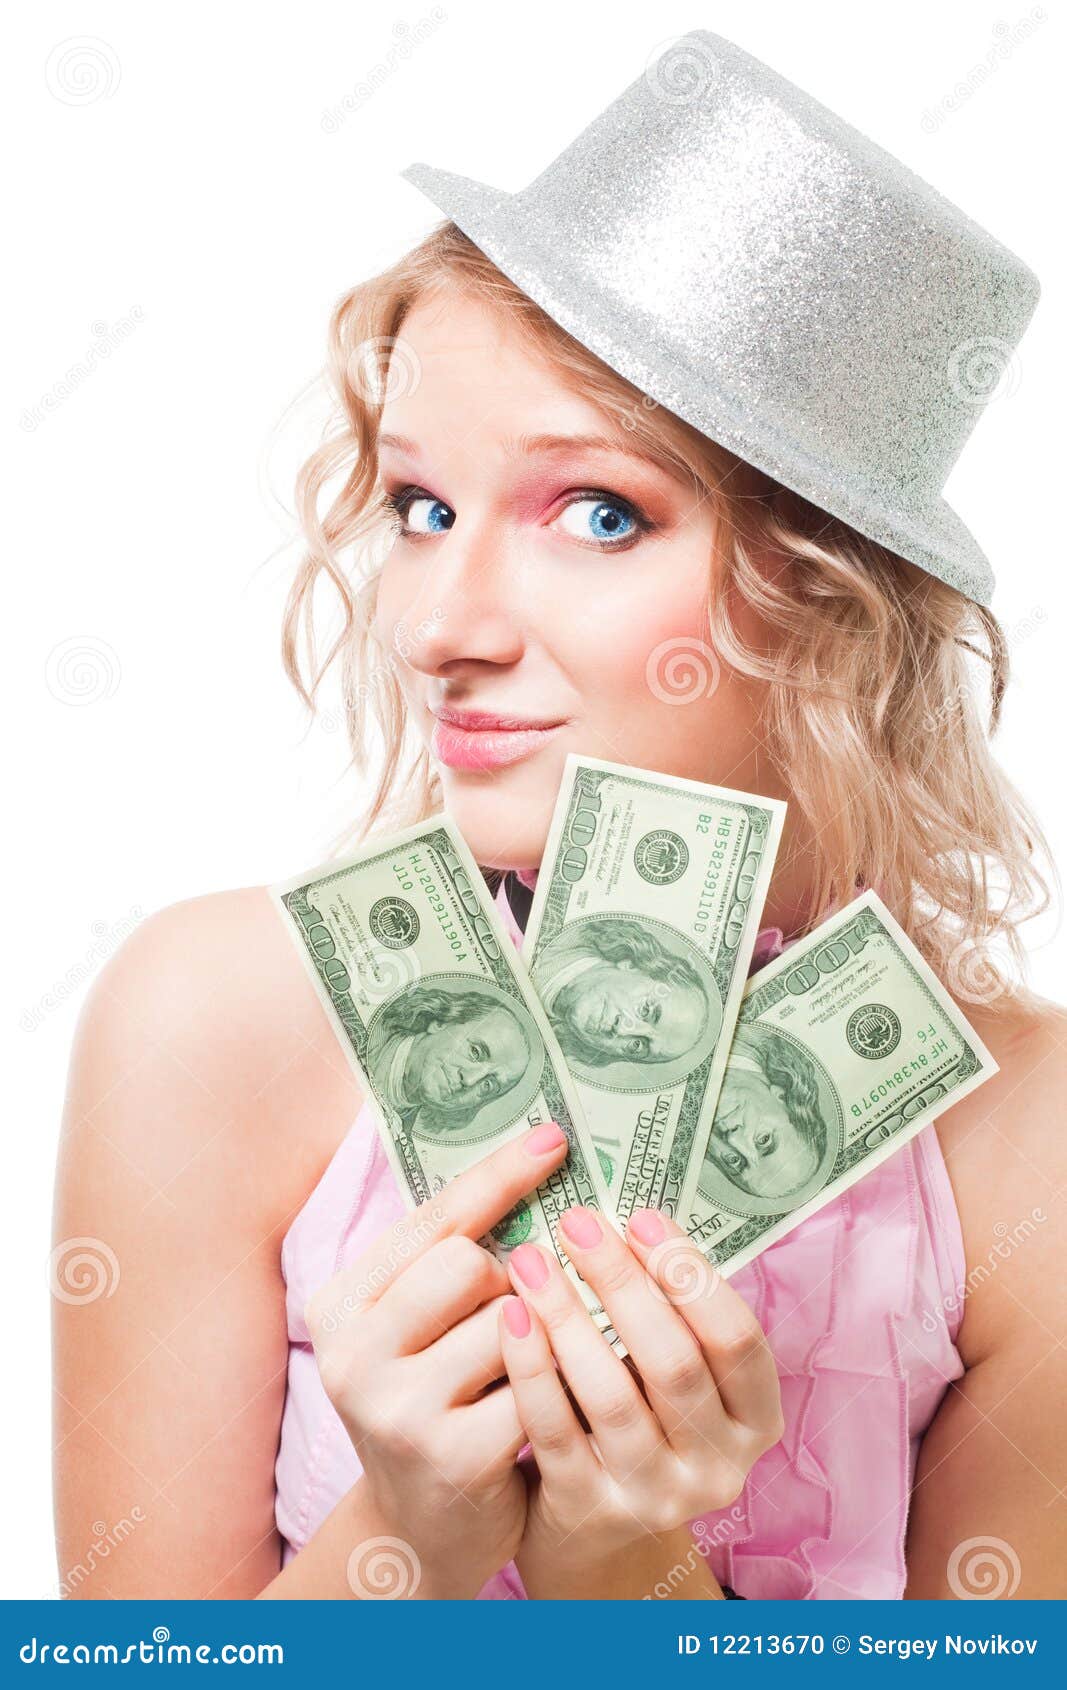 Magician woman with cash dollars make a trick, isolated. - magician-woman-dollars-12213670